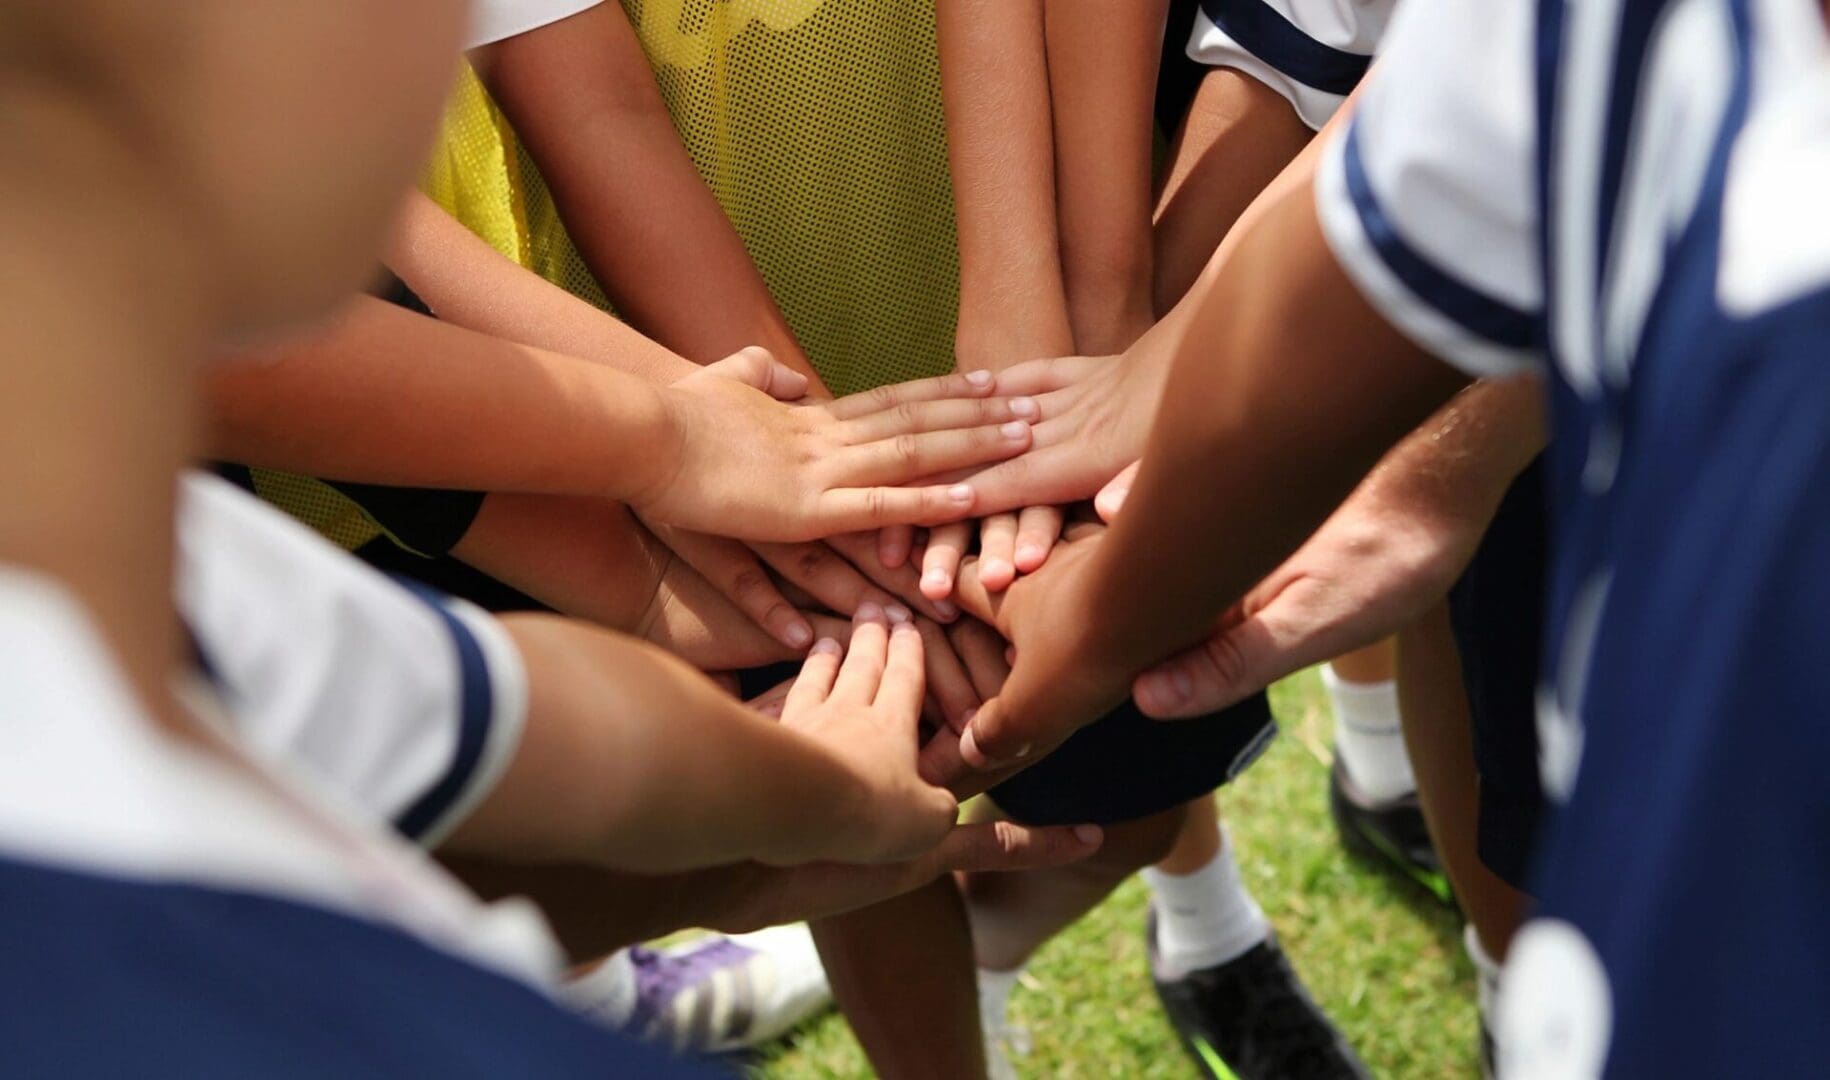 A group of soccer players putting their hands together.